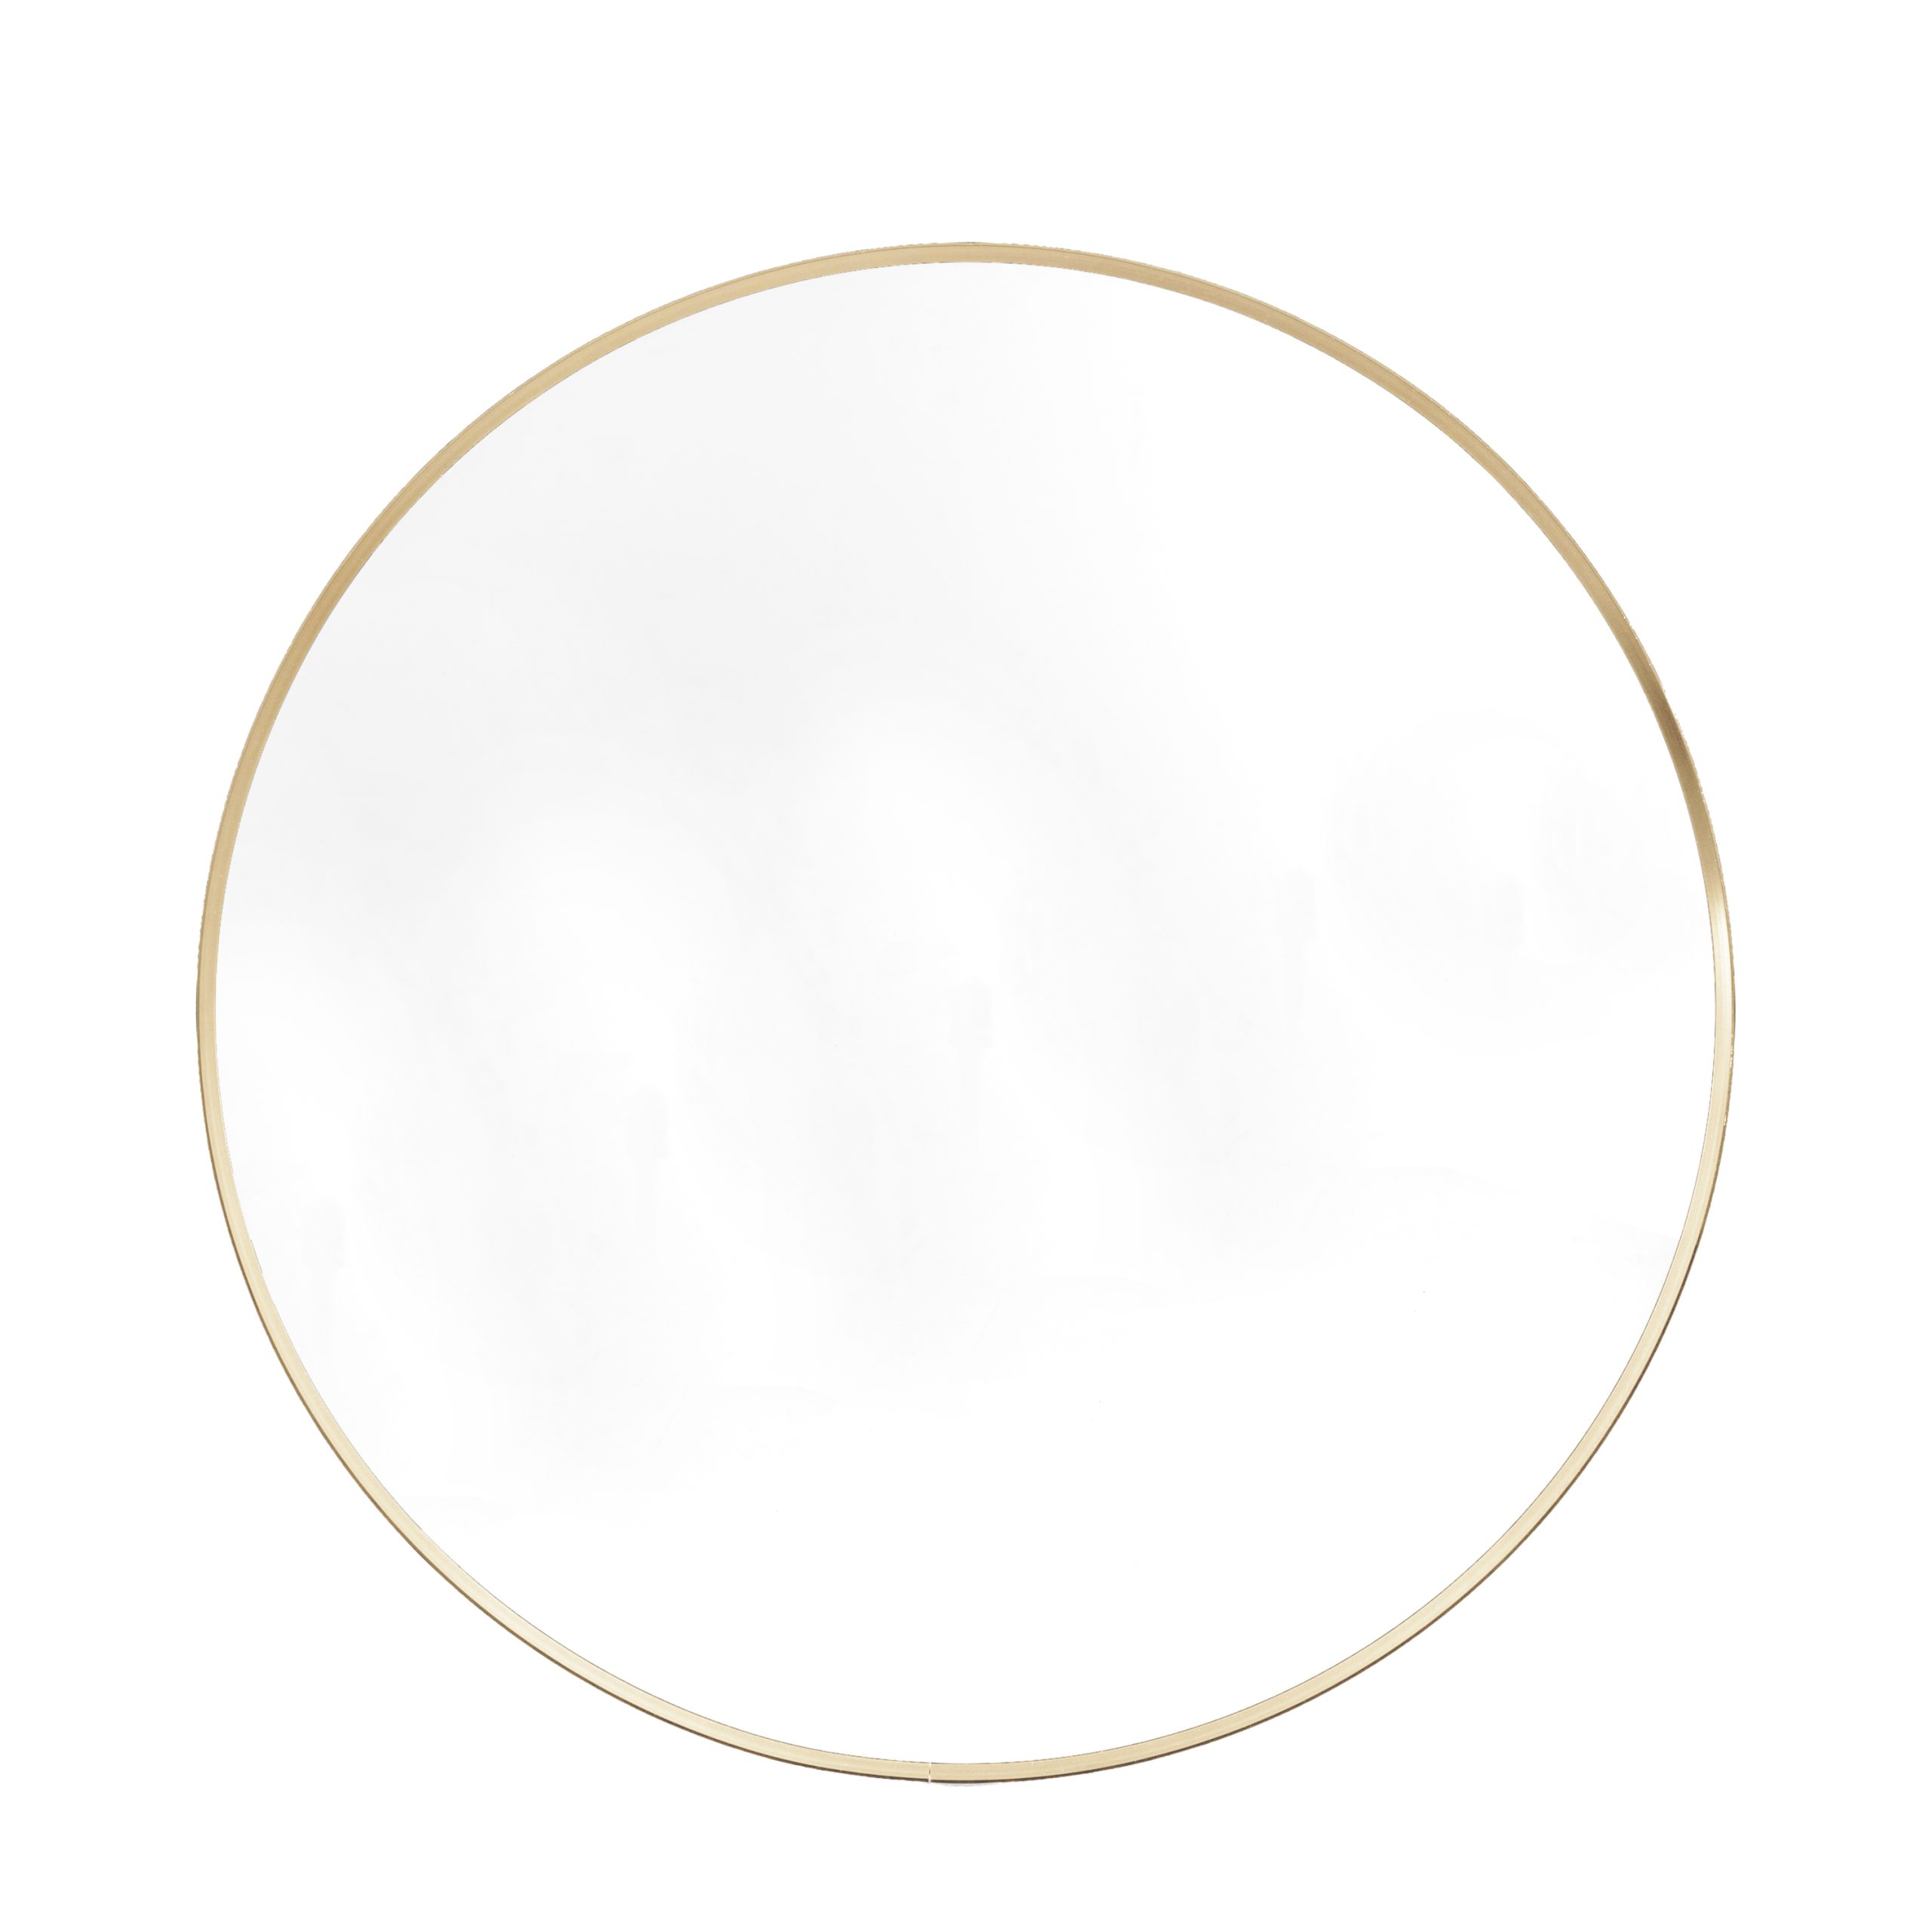 Gallery Direct Holworth Large Round Mirror Gold | Shackletons